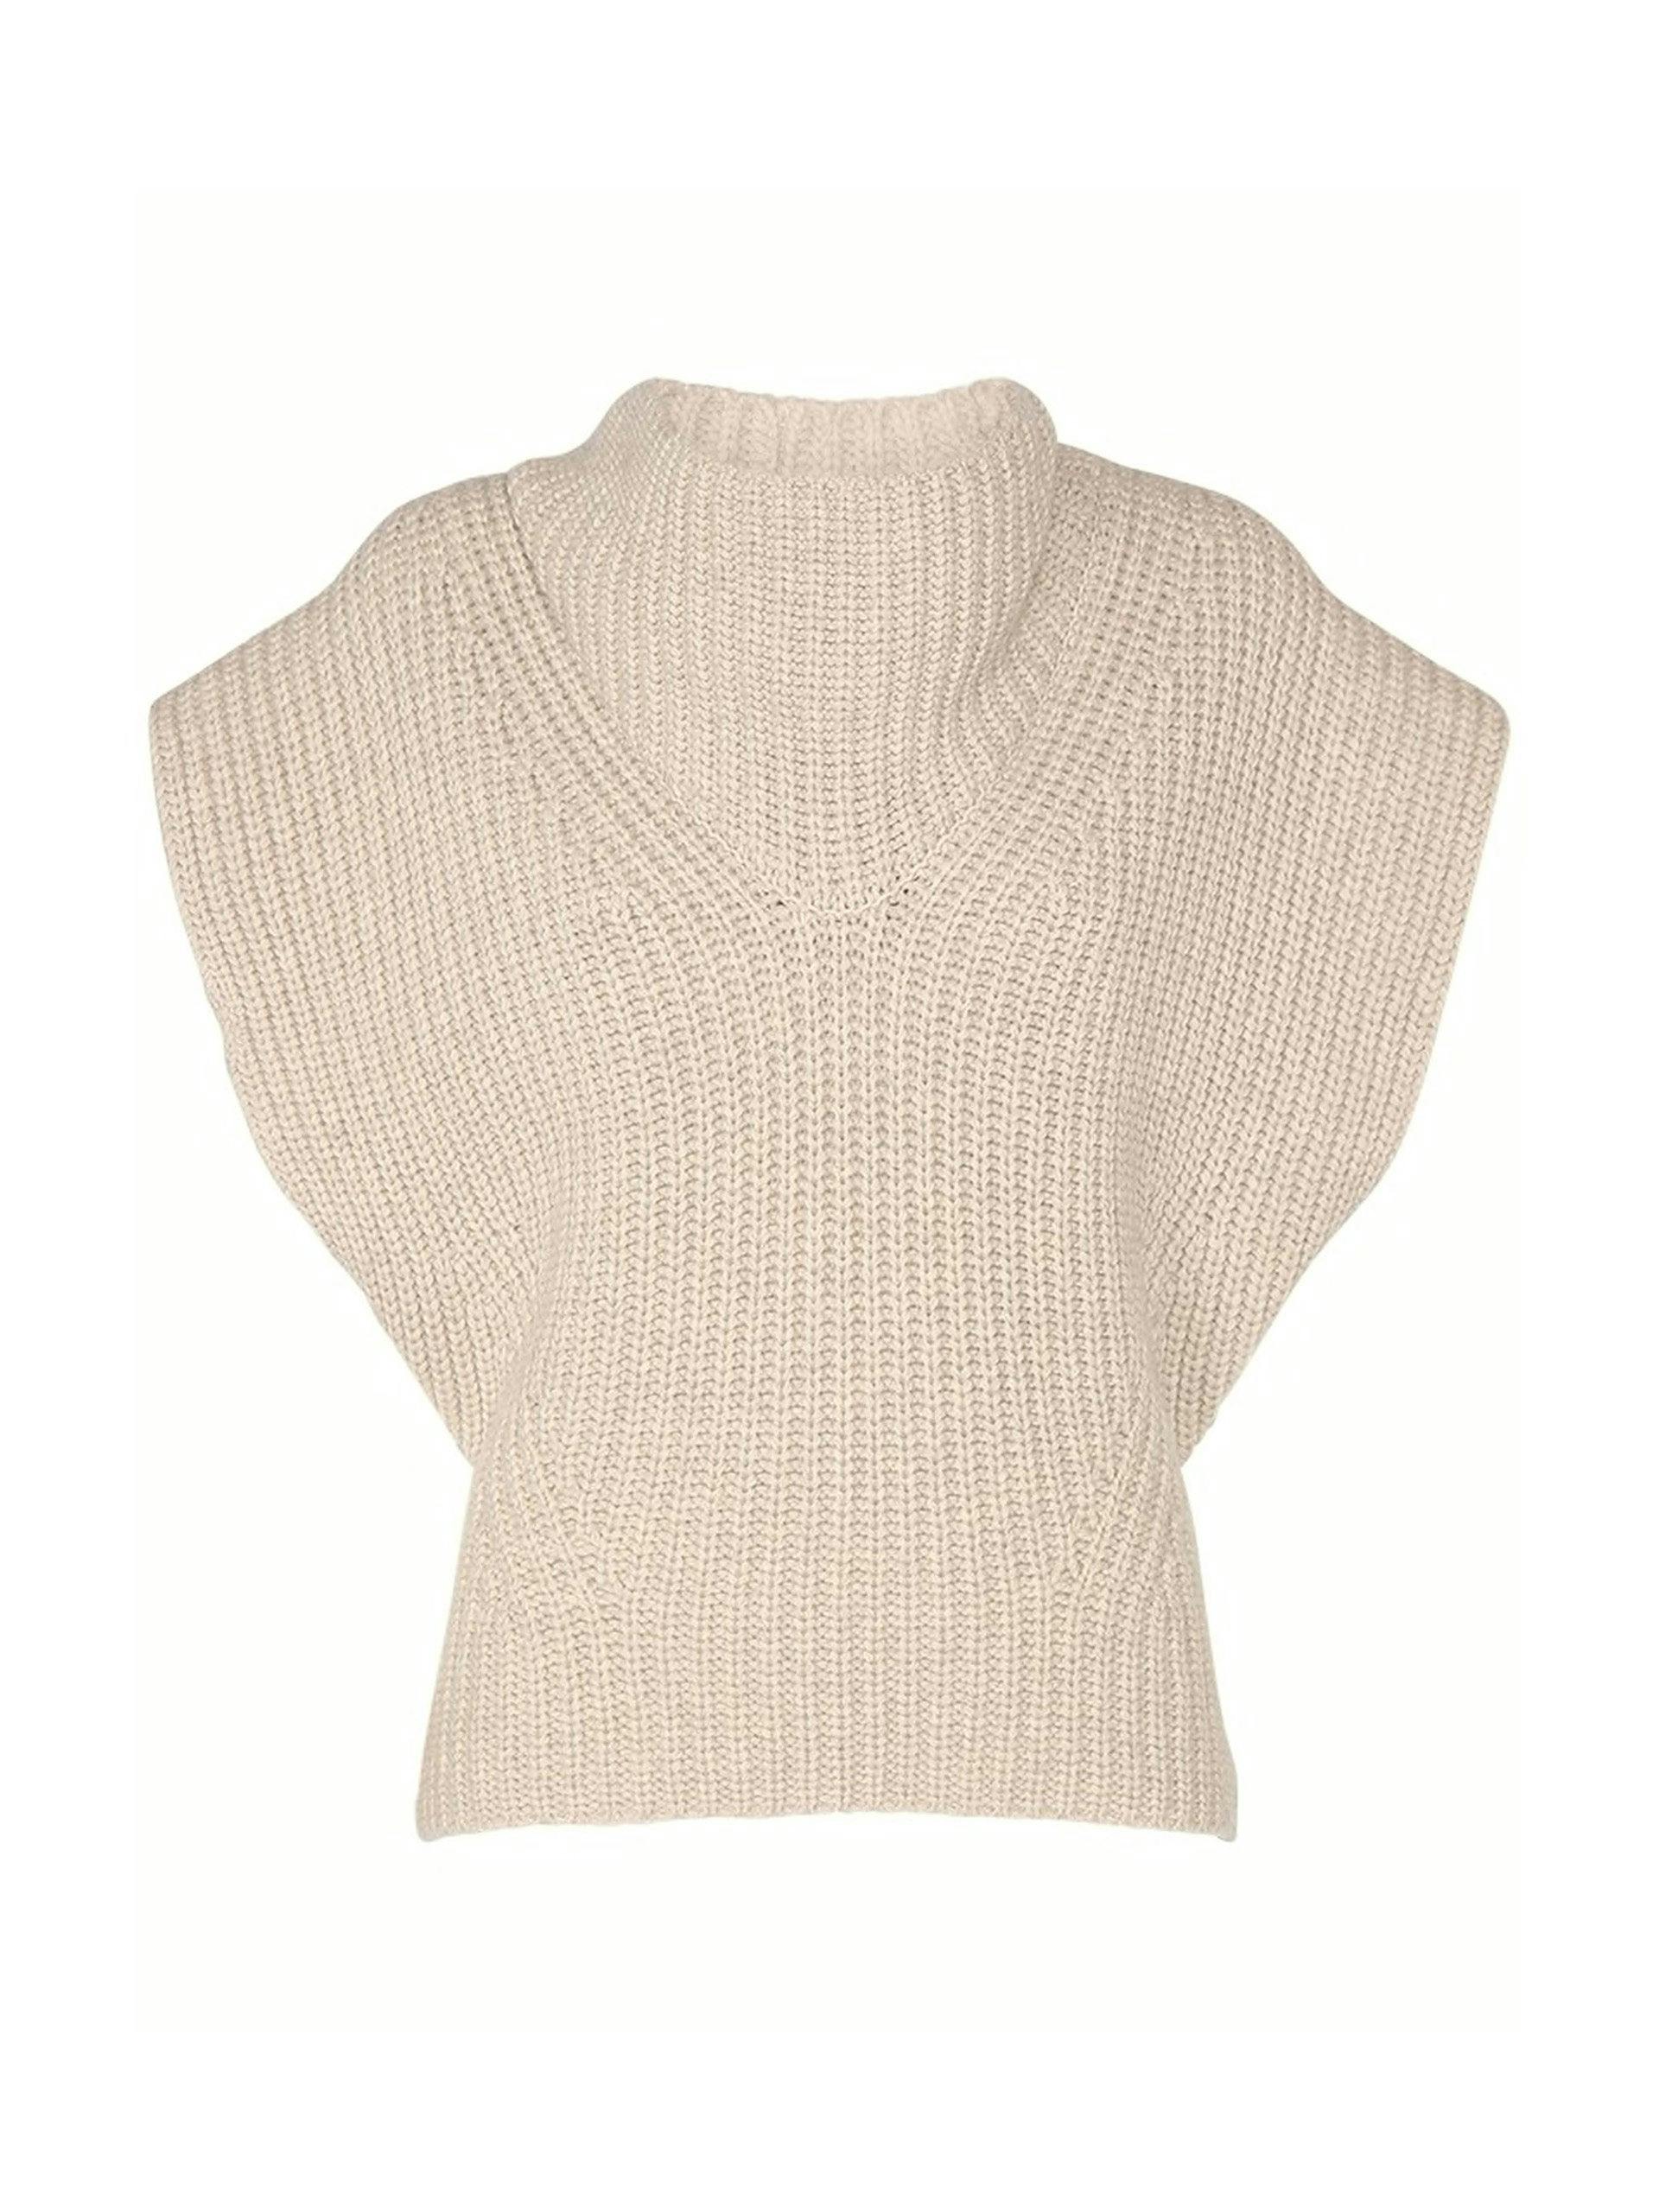 Laos mohair and cashmere sweater